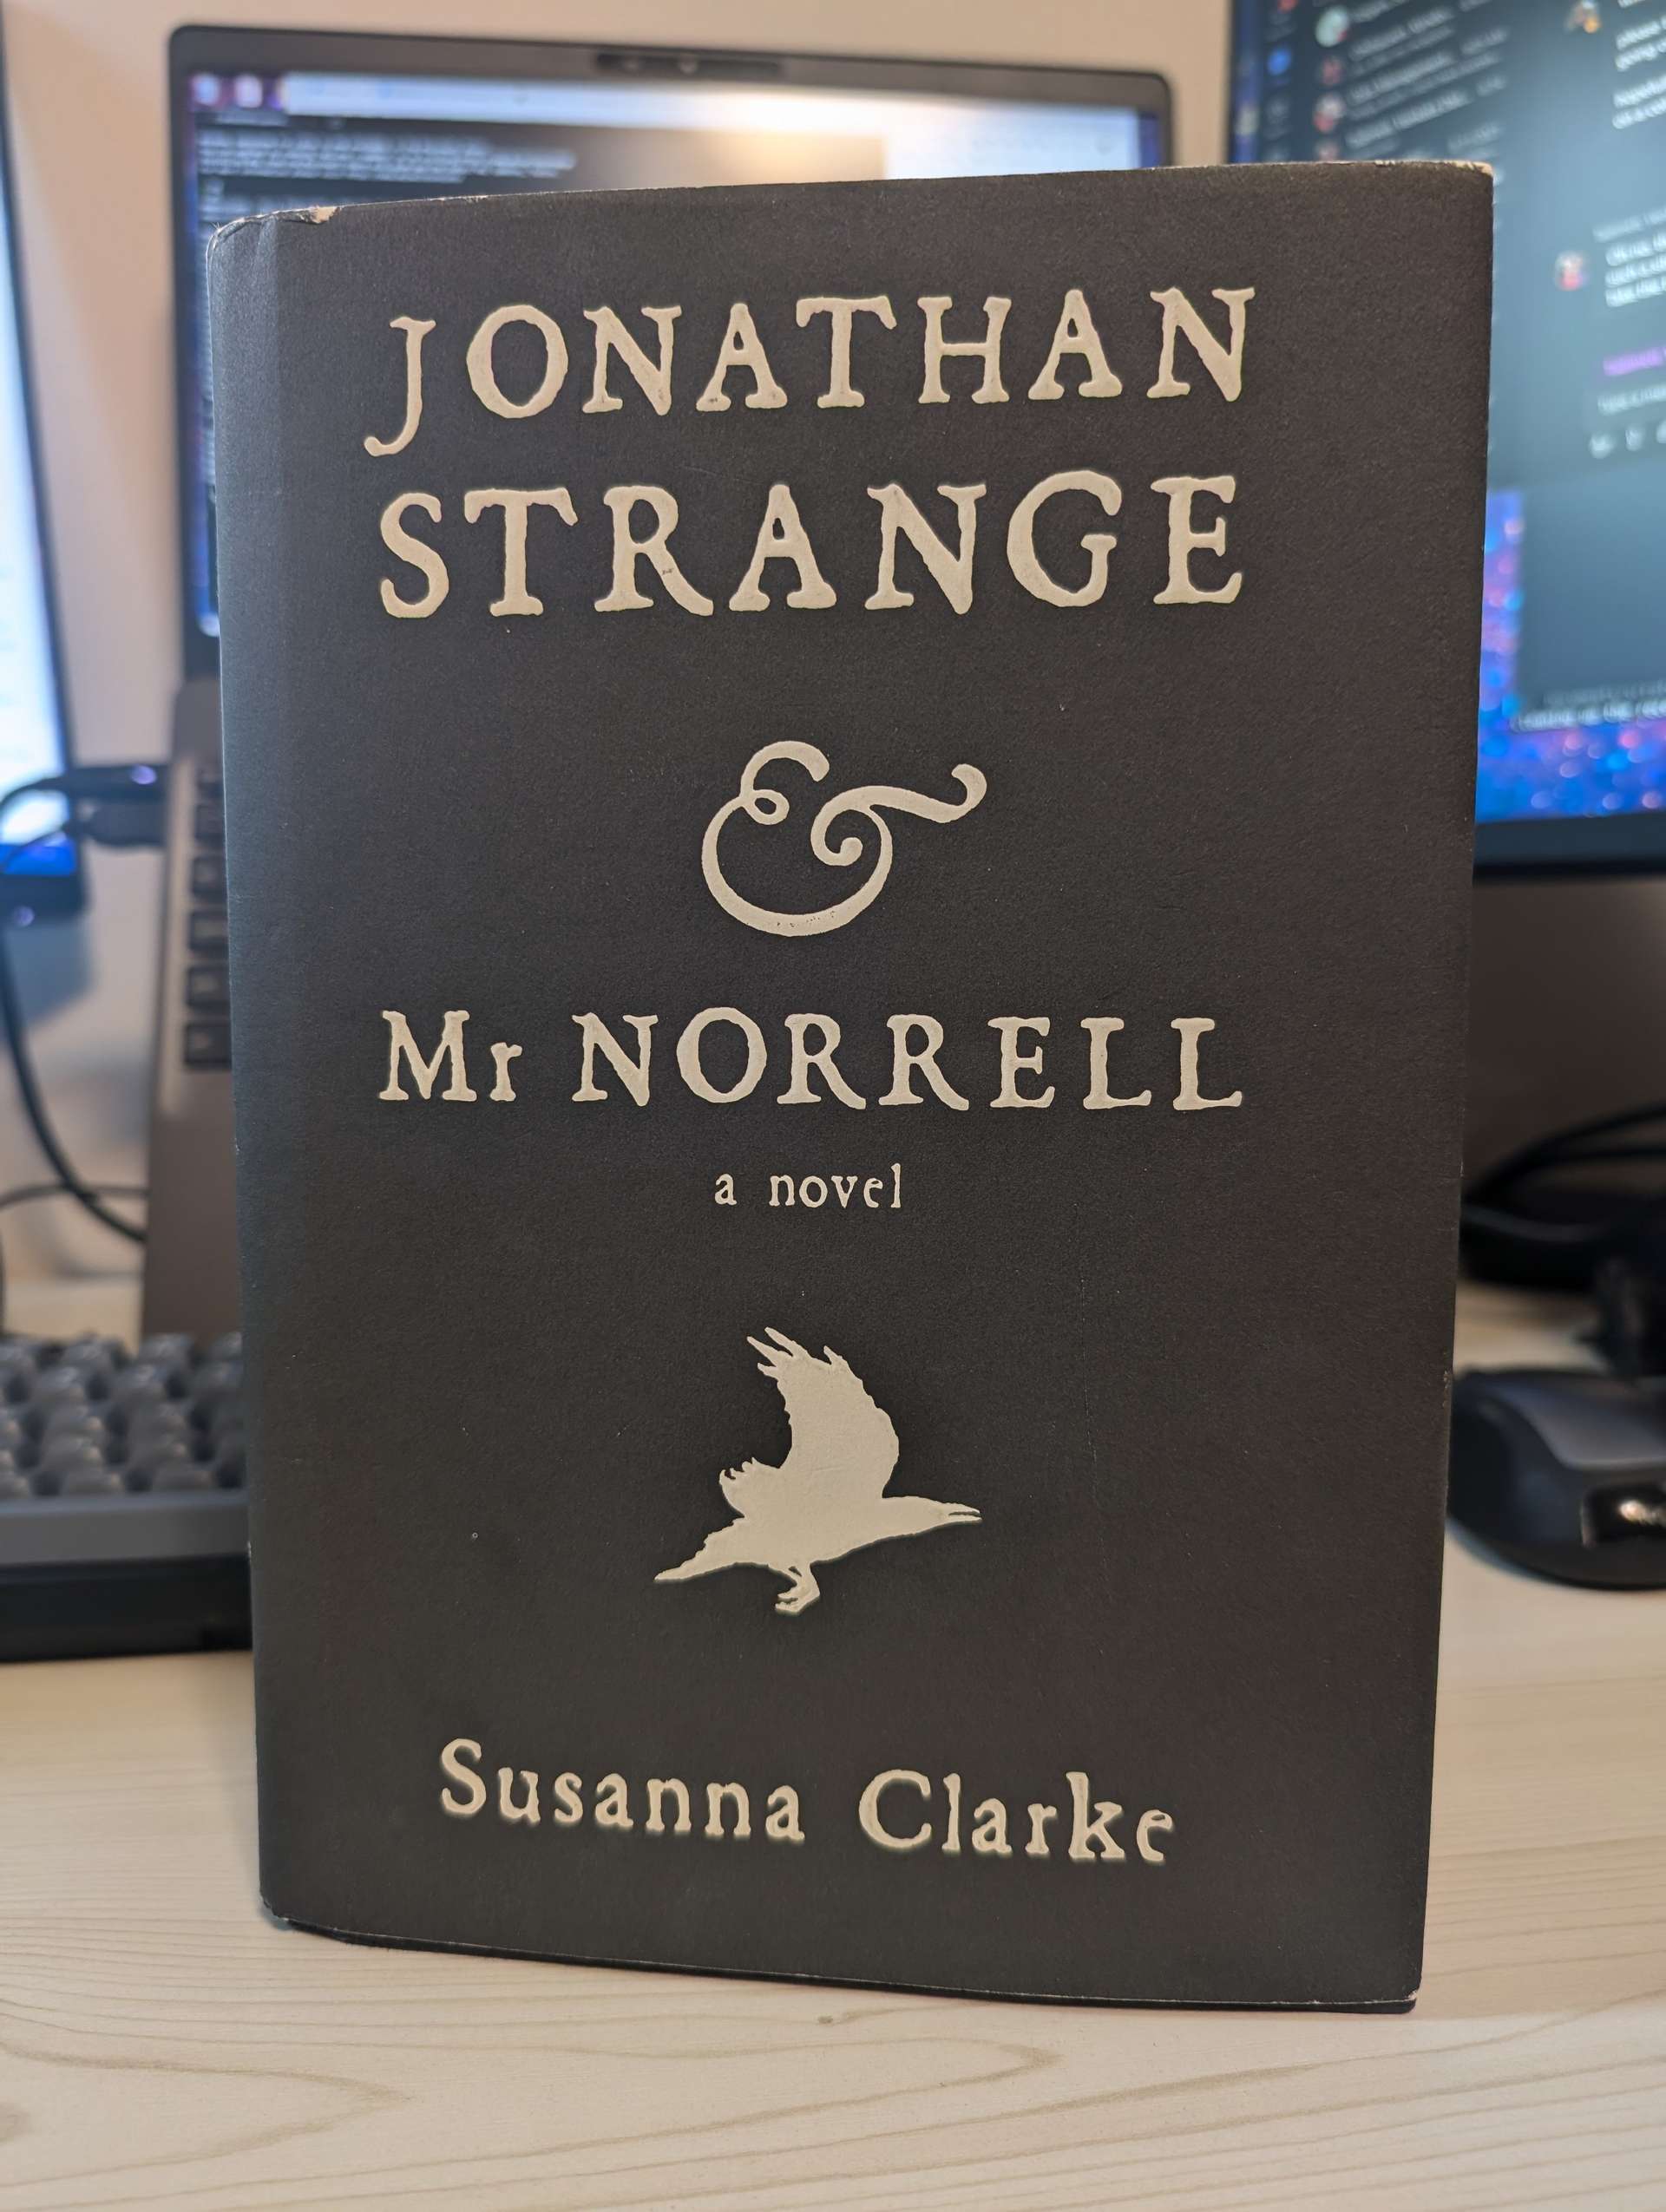 Photo of book "Jonathan Strange and Mr. Norrell" by Susanna Clark. First Edition, First printing, US Edition, Black Cover.